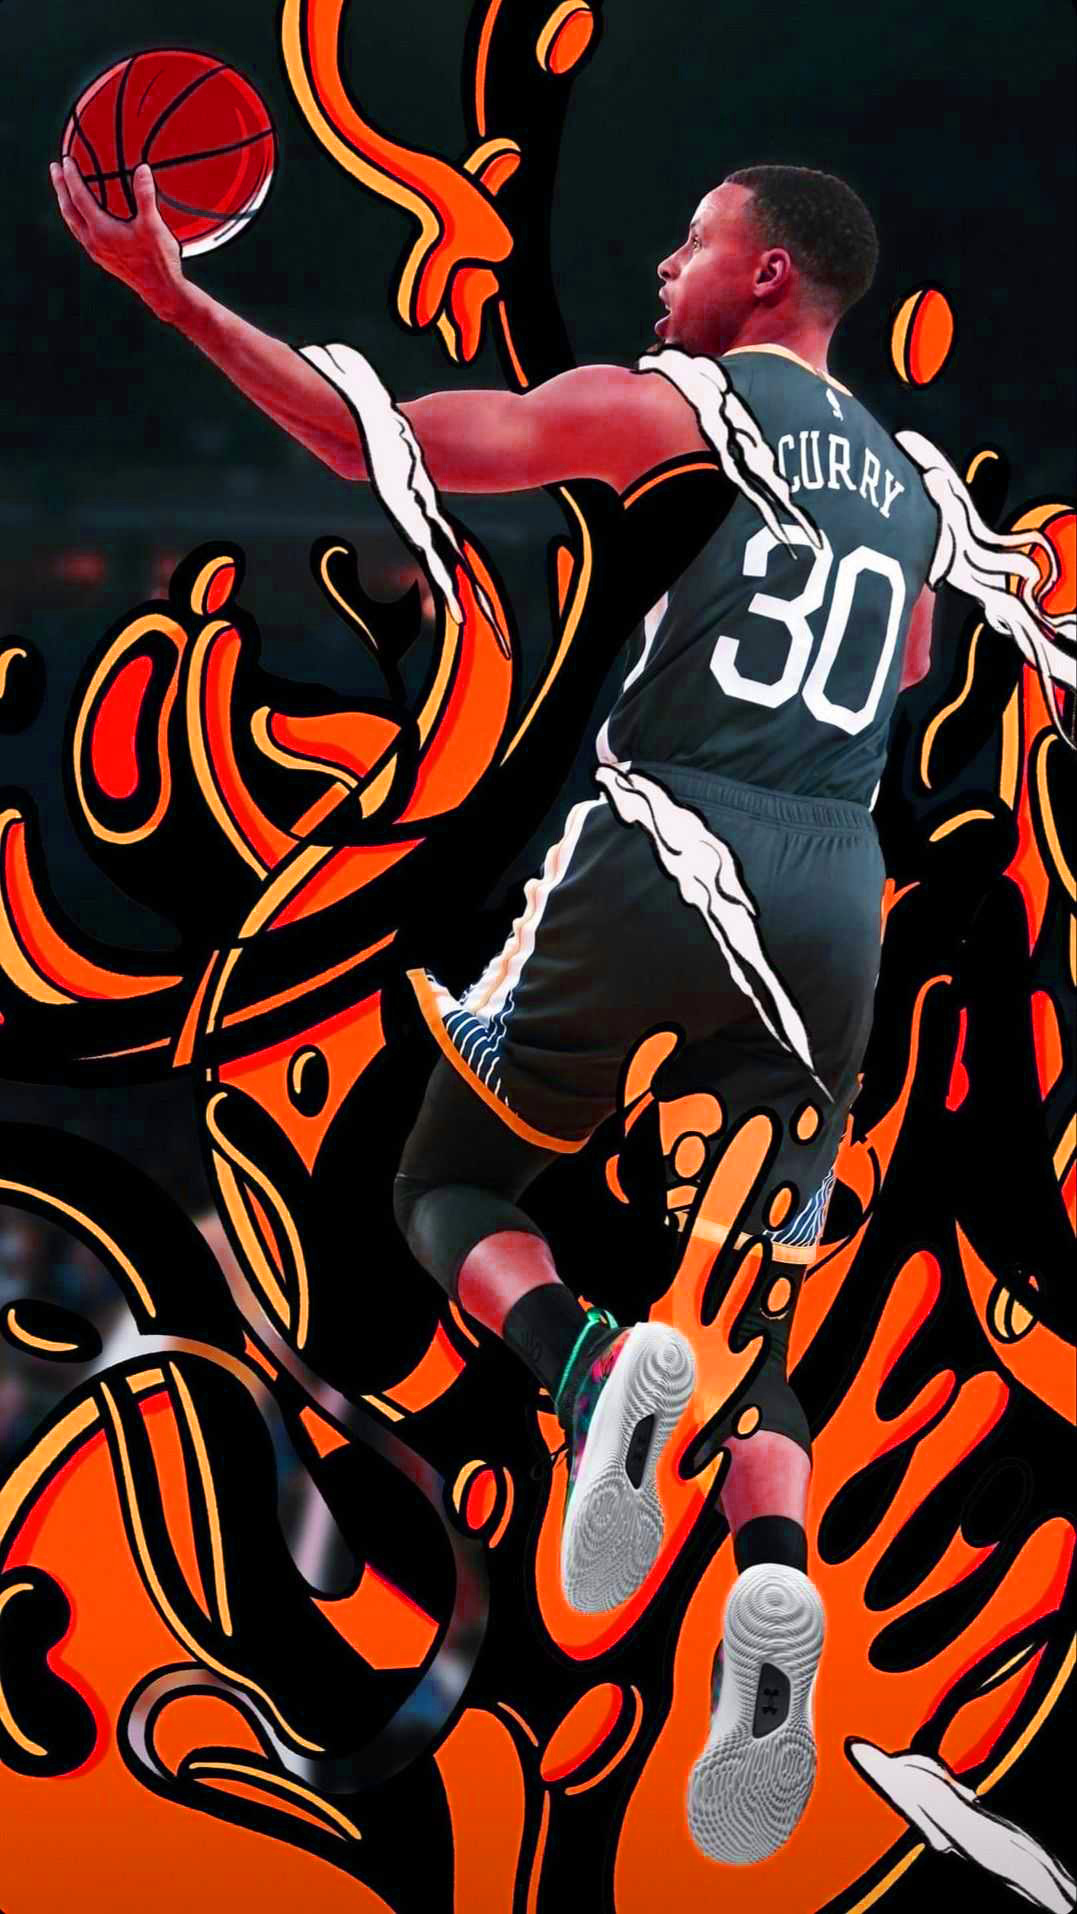 Steph Curry Wallpaper - NawPic